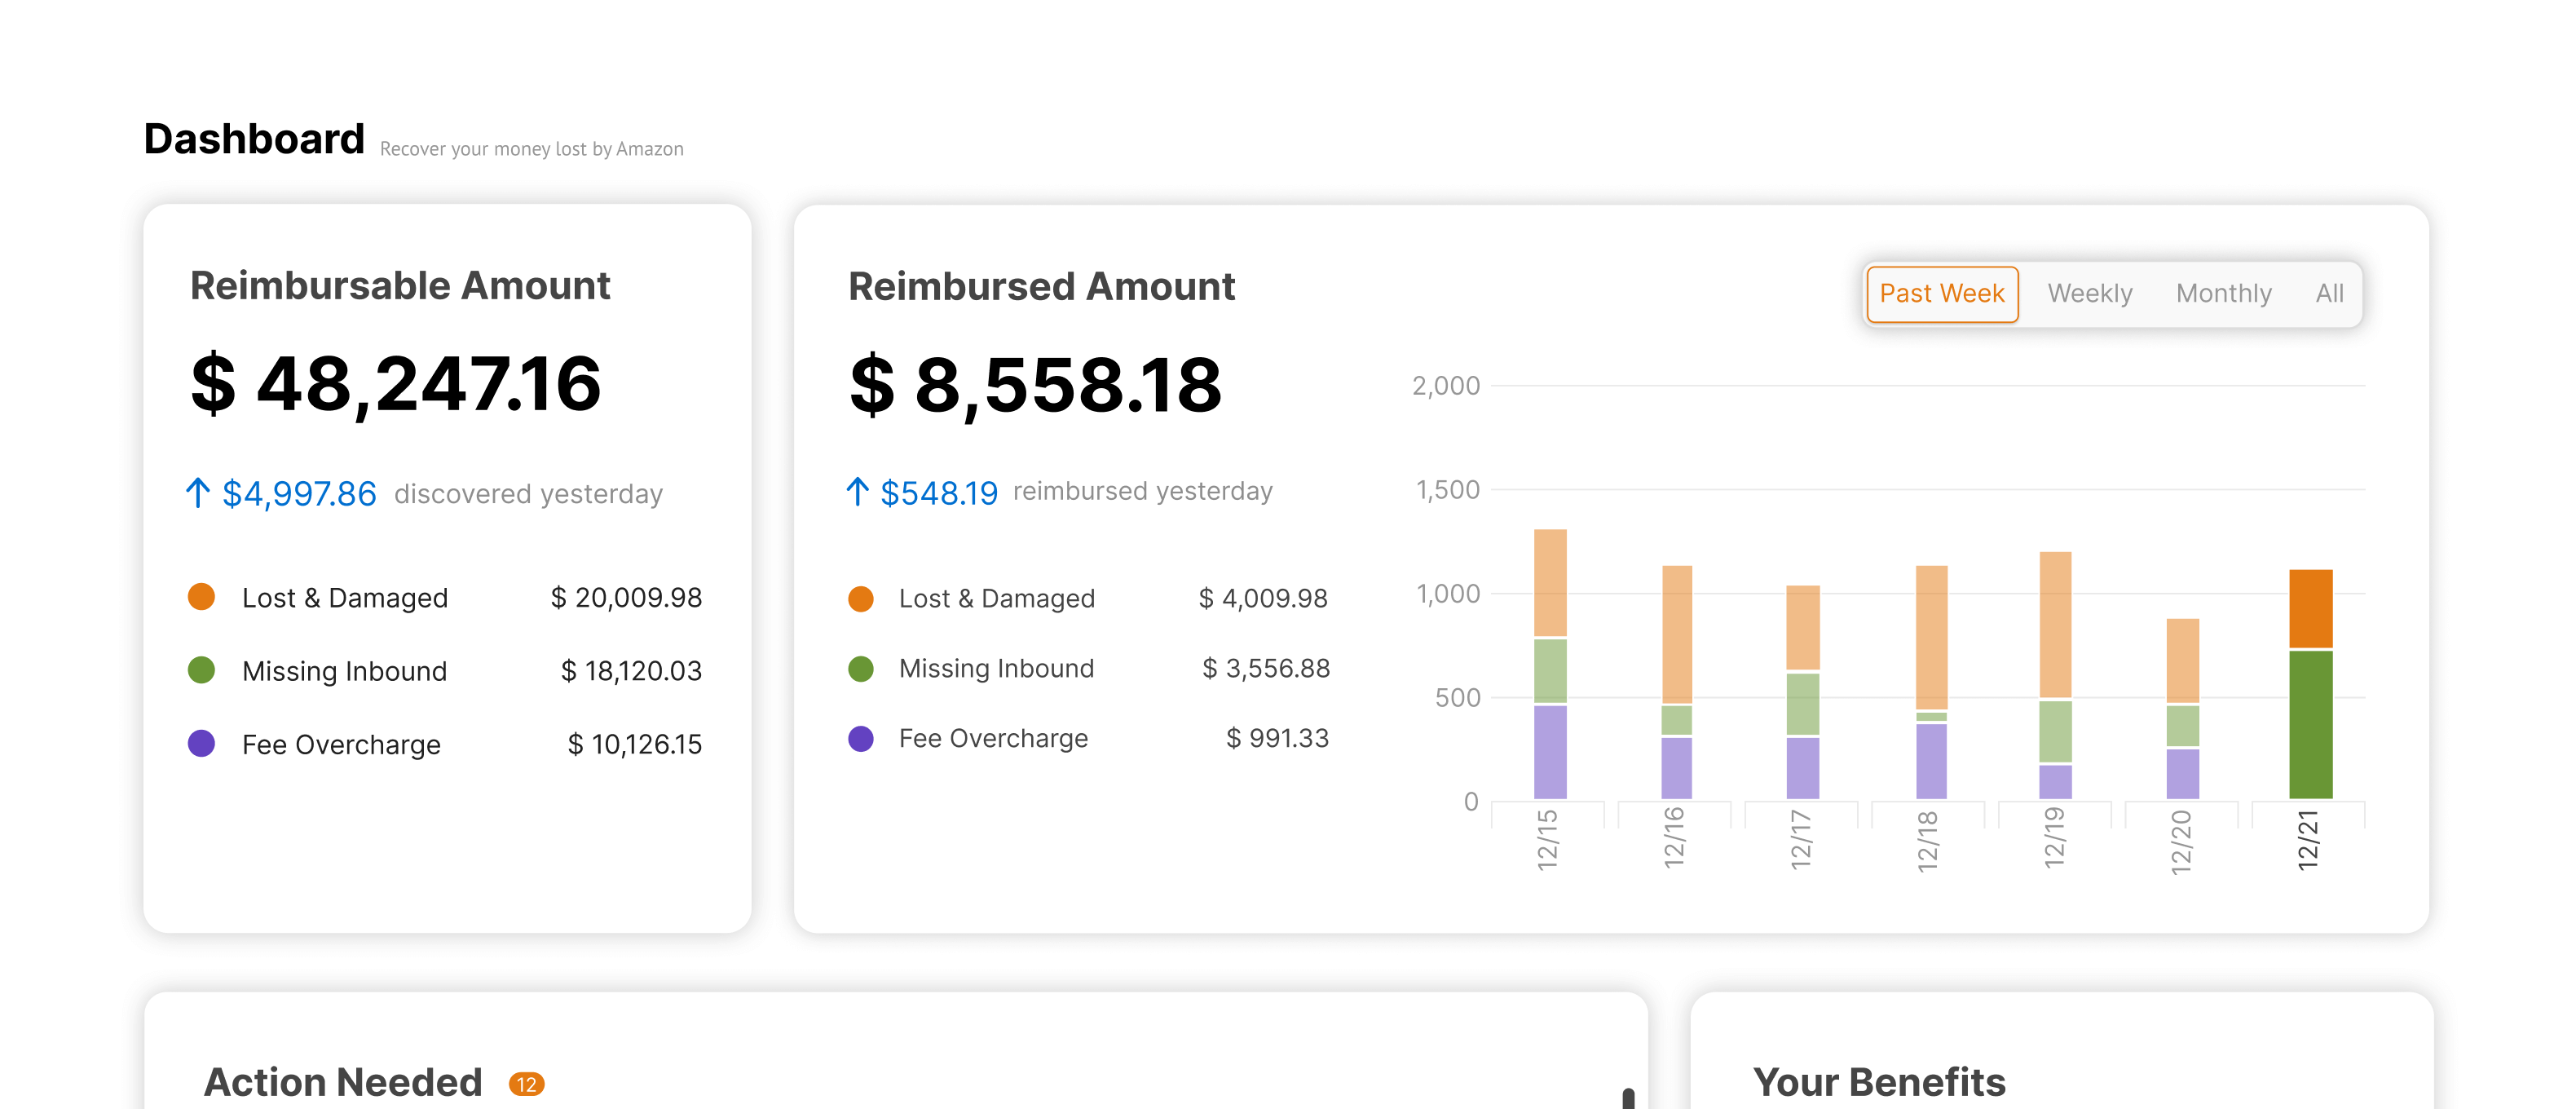 View all reimbursement in one sight at Refully's dashboard